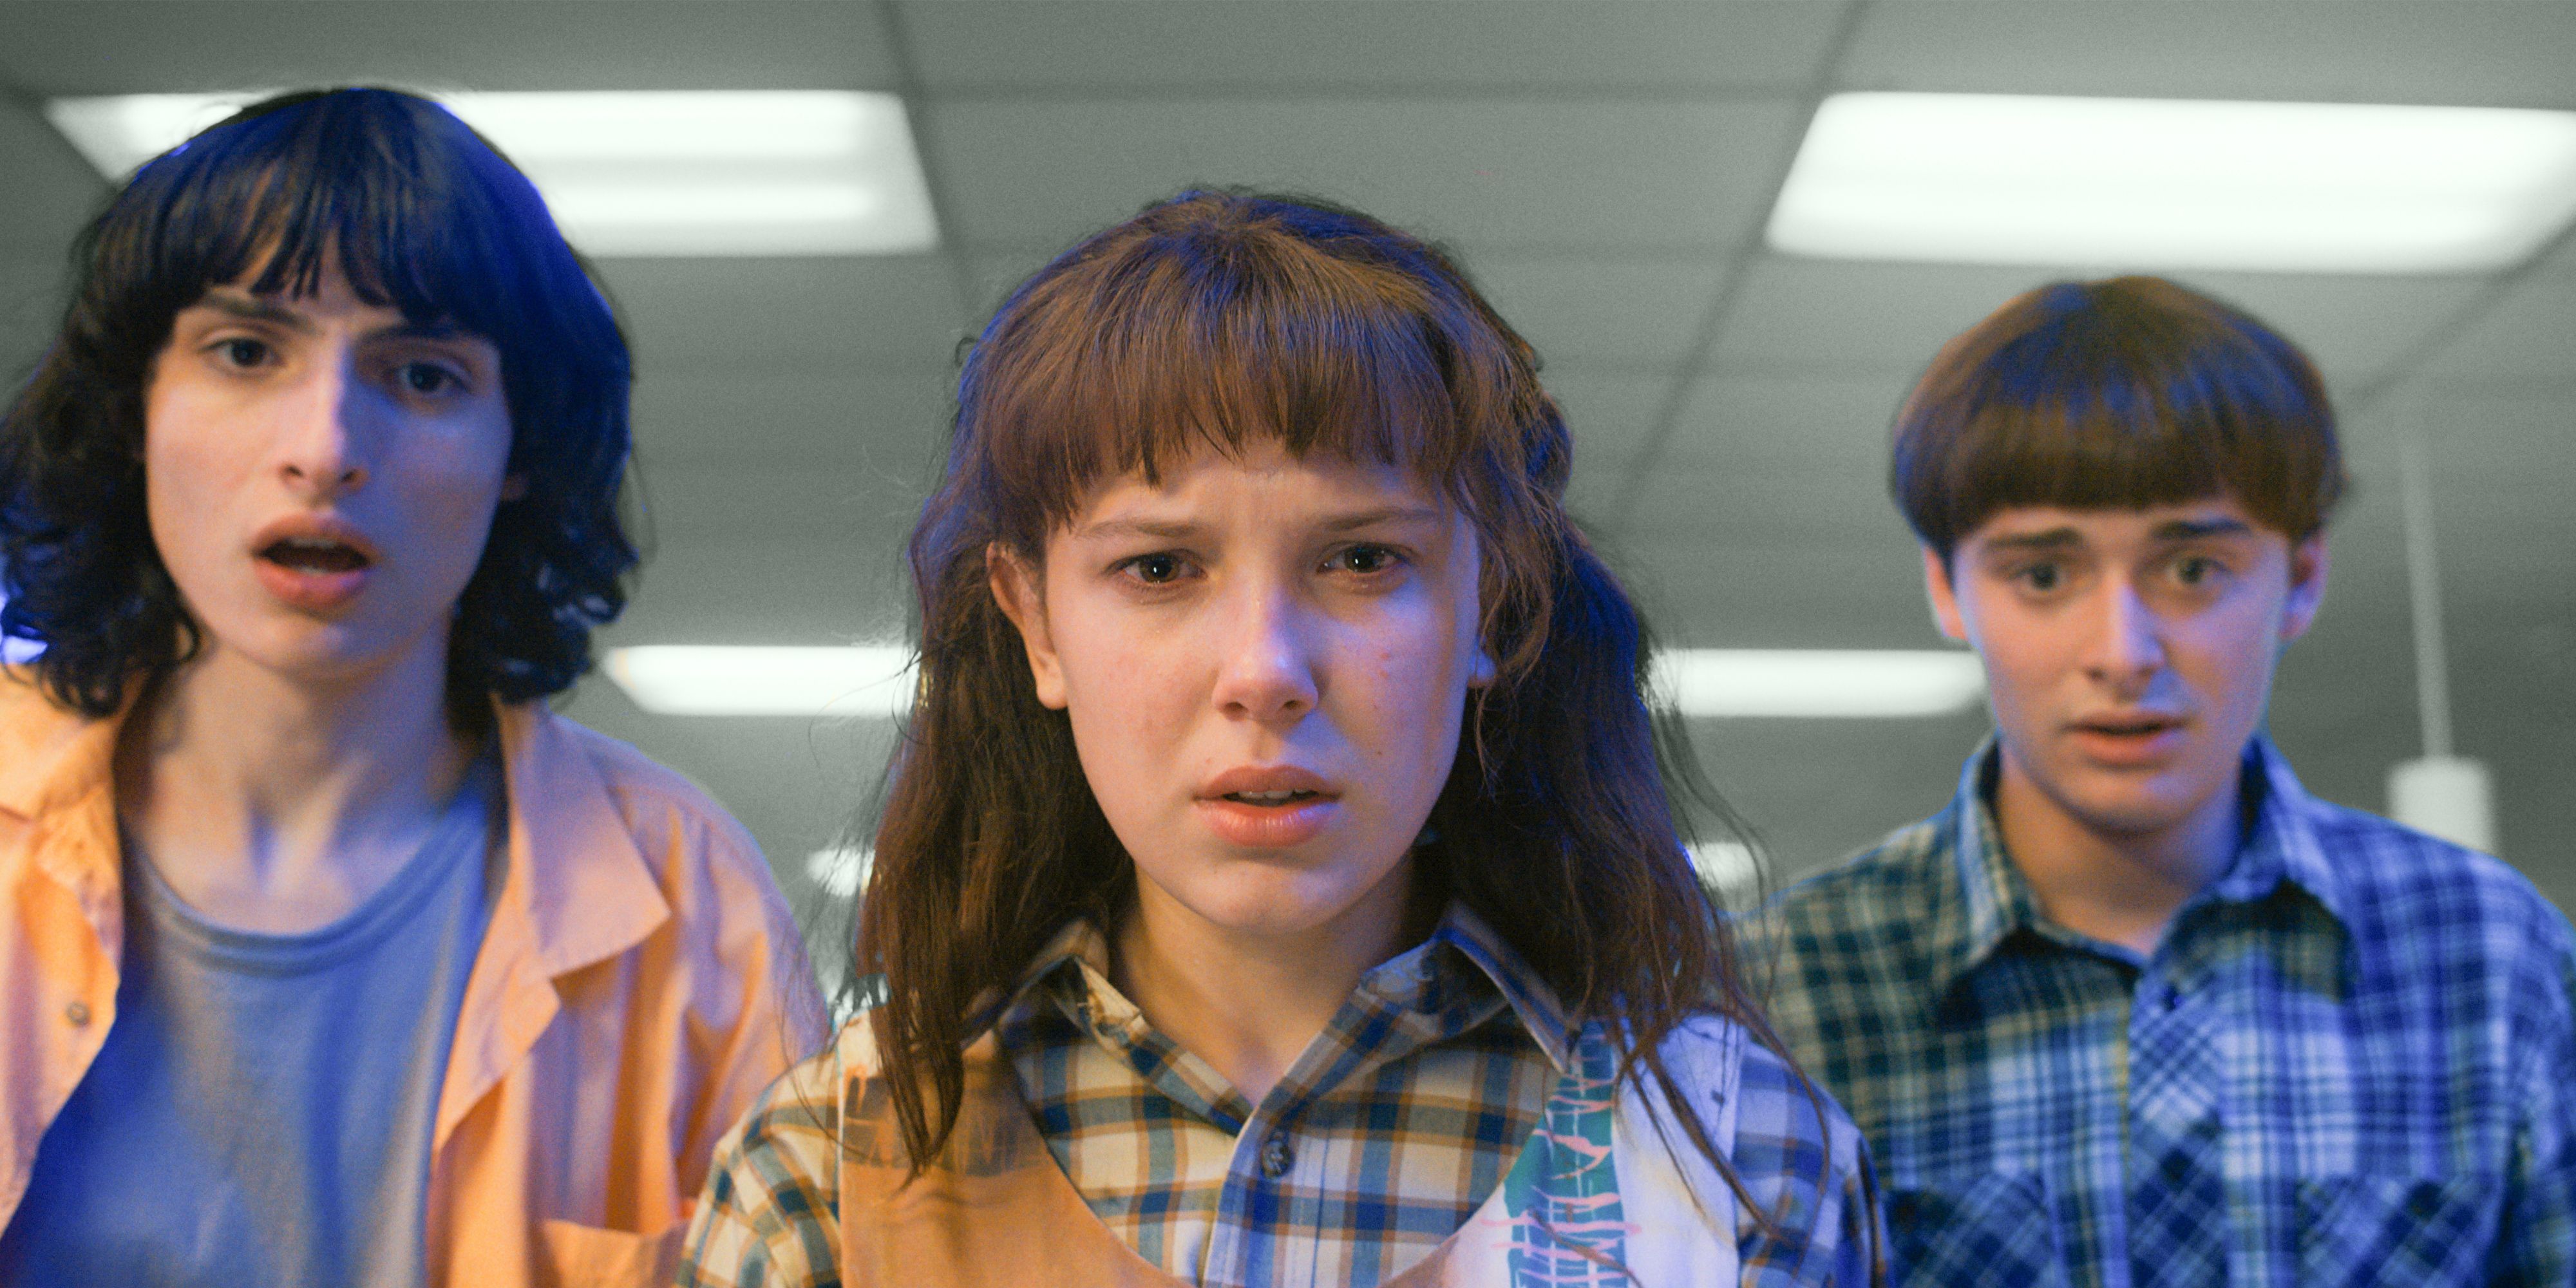 Will we see more people with powers like Eleven in Stranger Things?